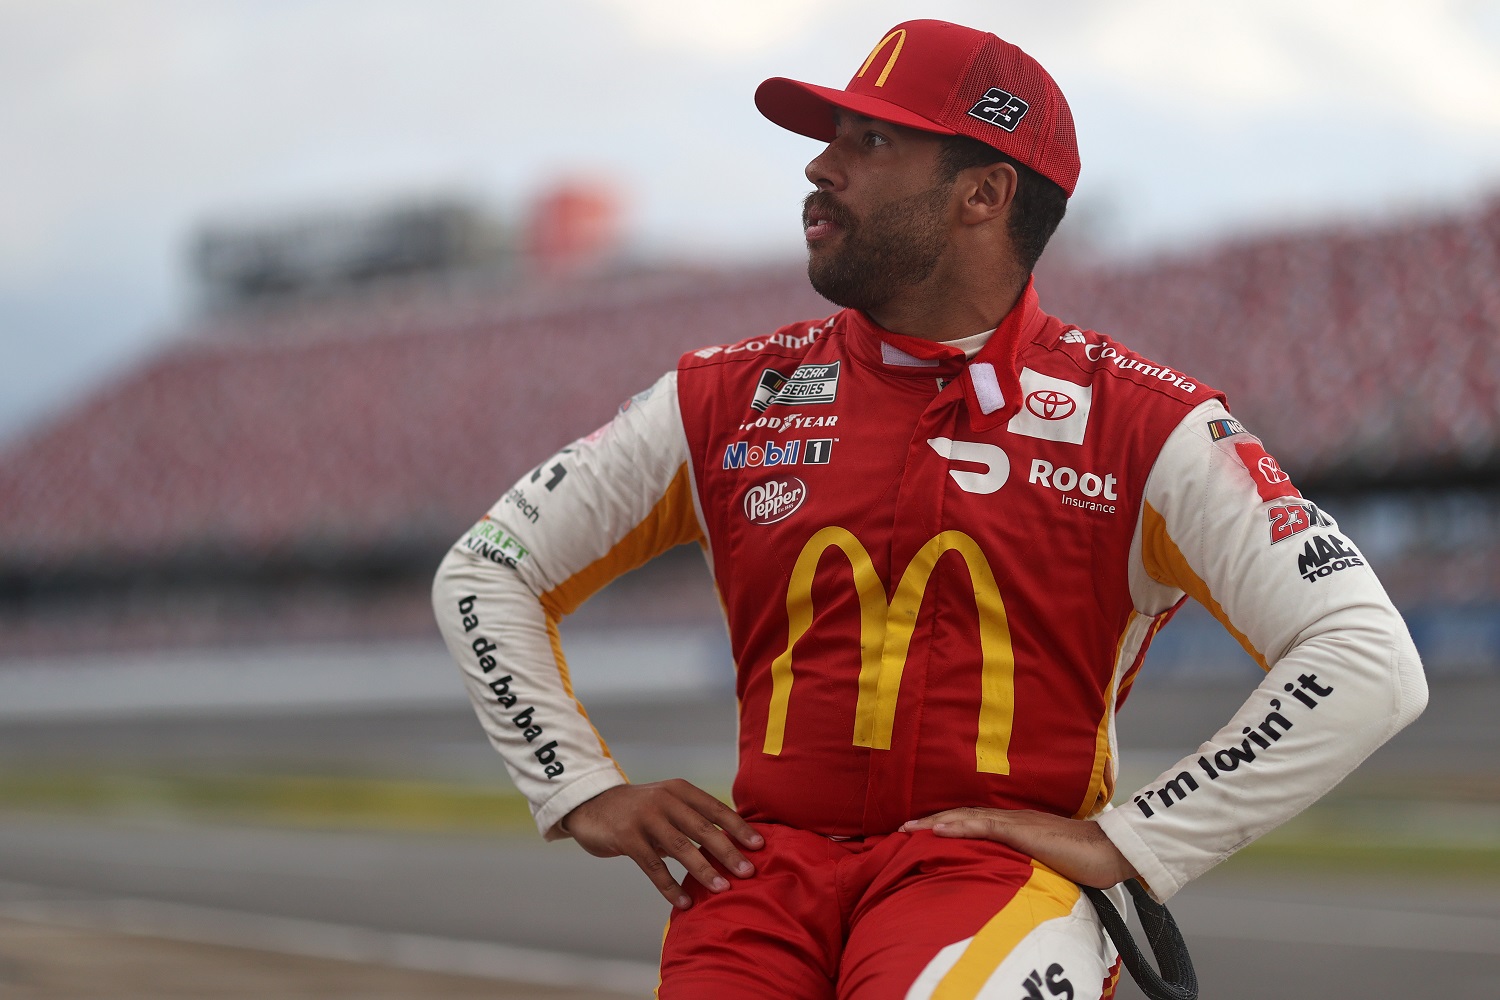 Bubba Wallace, driver of the No. 23 Toyota, waits for the victory lane ceremonies after winning the rain-shortened NASCAR Cup Series YellaWood 500 at Talladega Superspeedway on Oct. 4, 2021, in Talladega, Alabama. | Chris Graythen/Getty Images